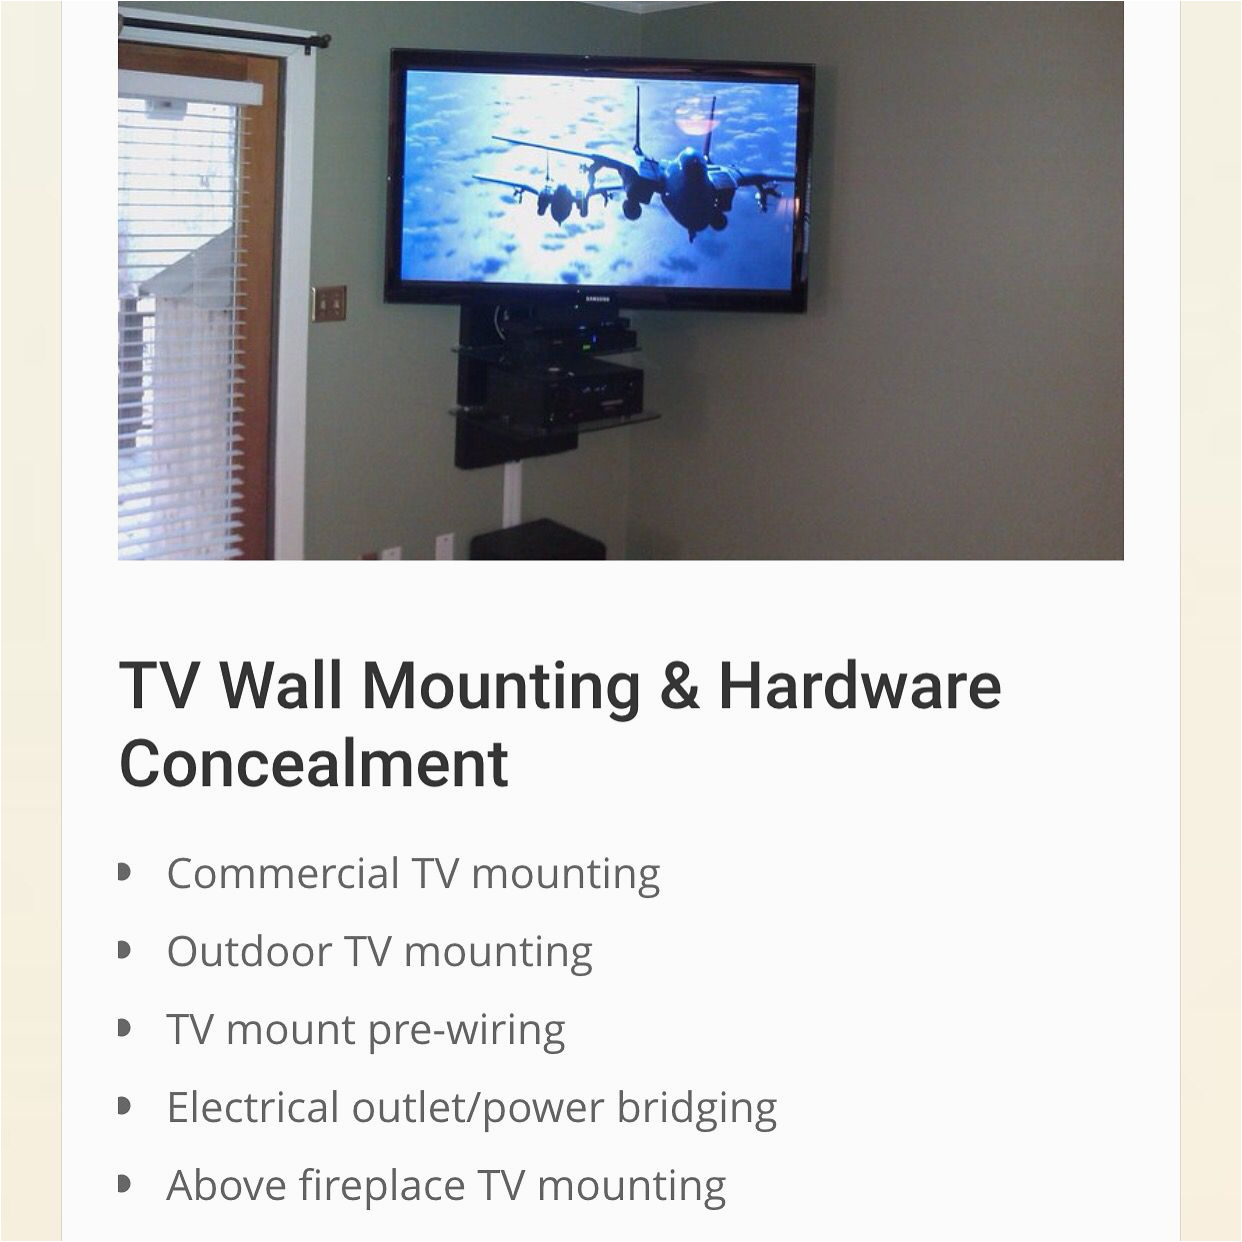 Mounting Tvs Walls Service for Resume Sample Free Tilting Tv Wall Mount with Installation Our Prices Start at Only